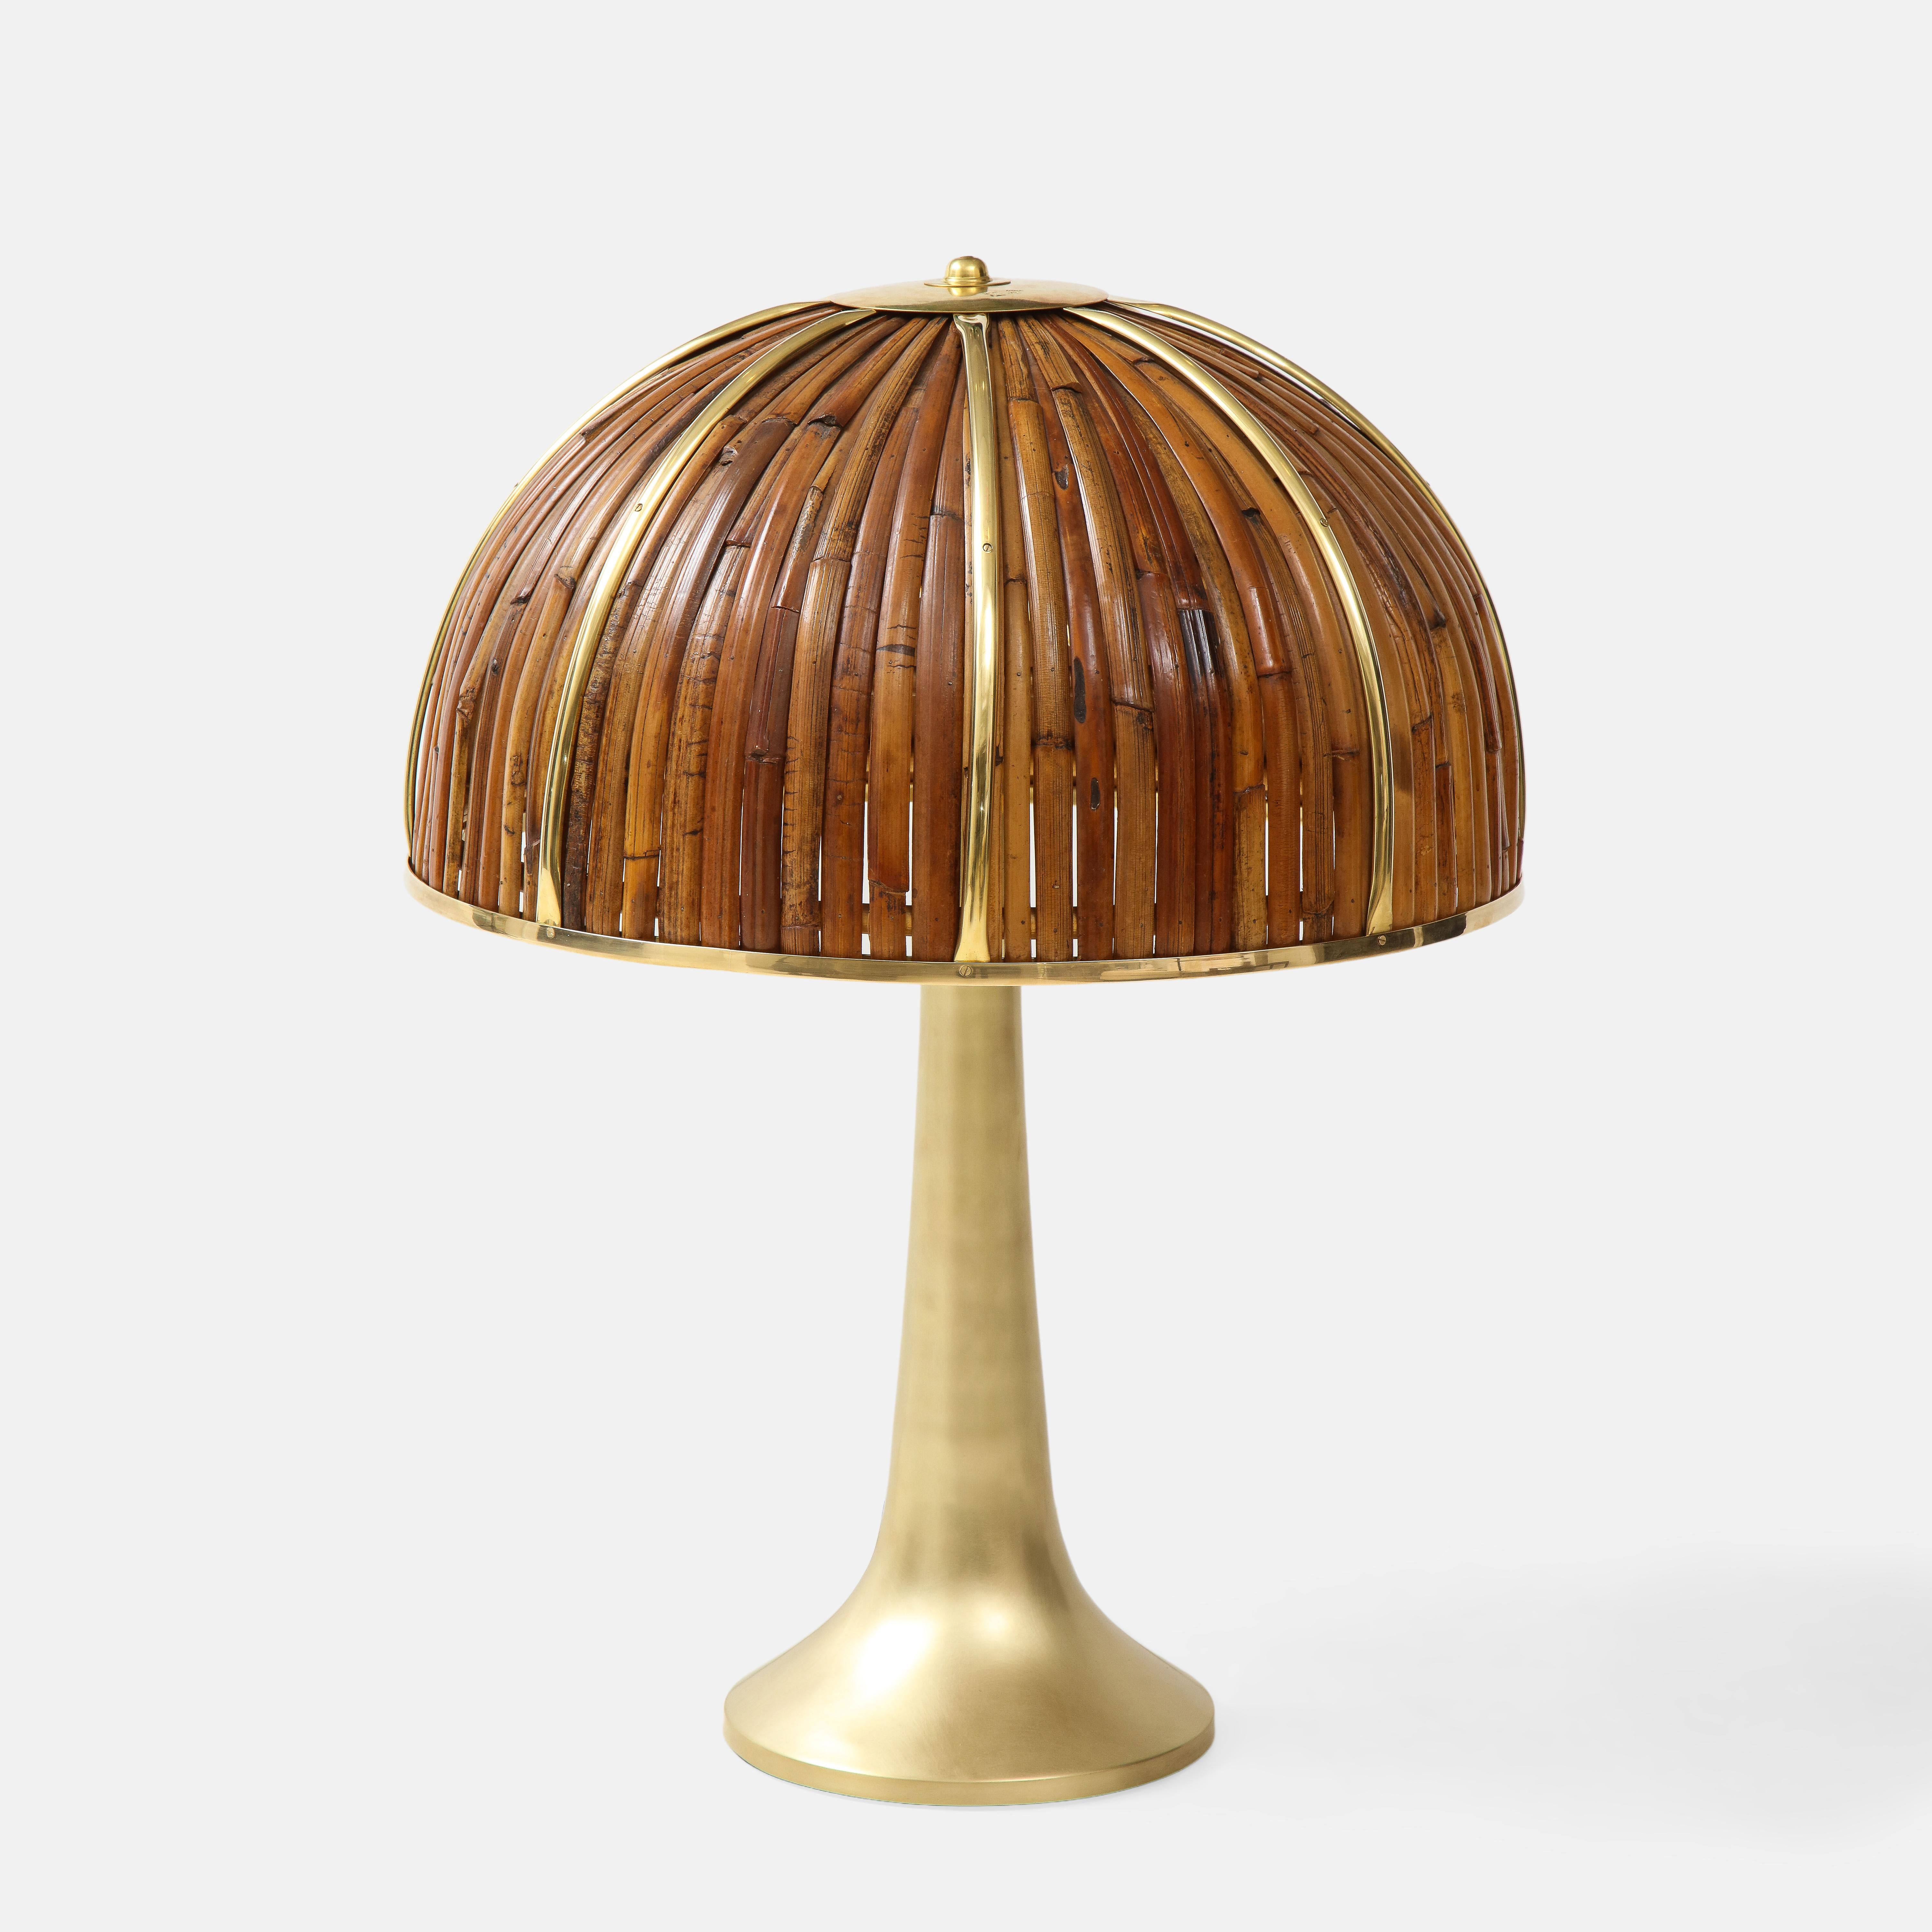 Large and rare 'Fungo' table lamp from the Rising Sun Series with lacquered bamboo strips and polished brass details on dome shade atop elegant flared brass base in a brushed gold finish, Italy, 1970s. Impressed with facsimile signature and artist’s